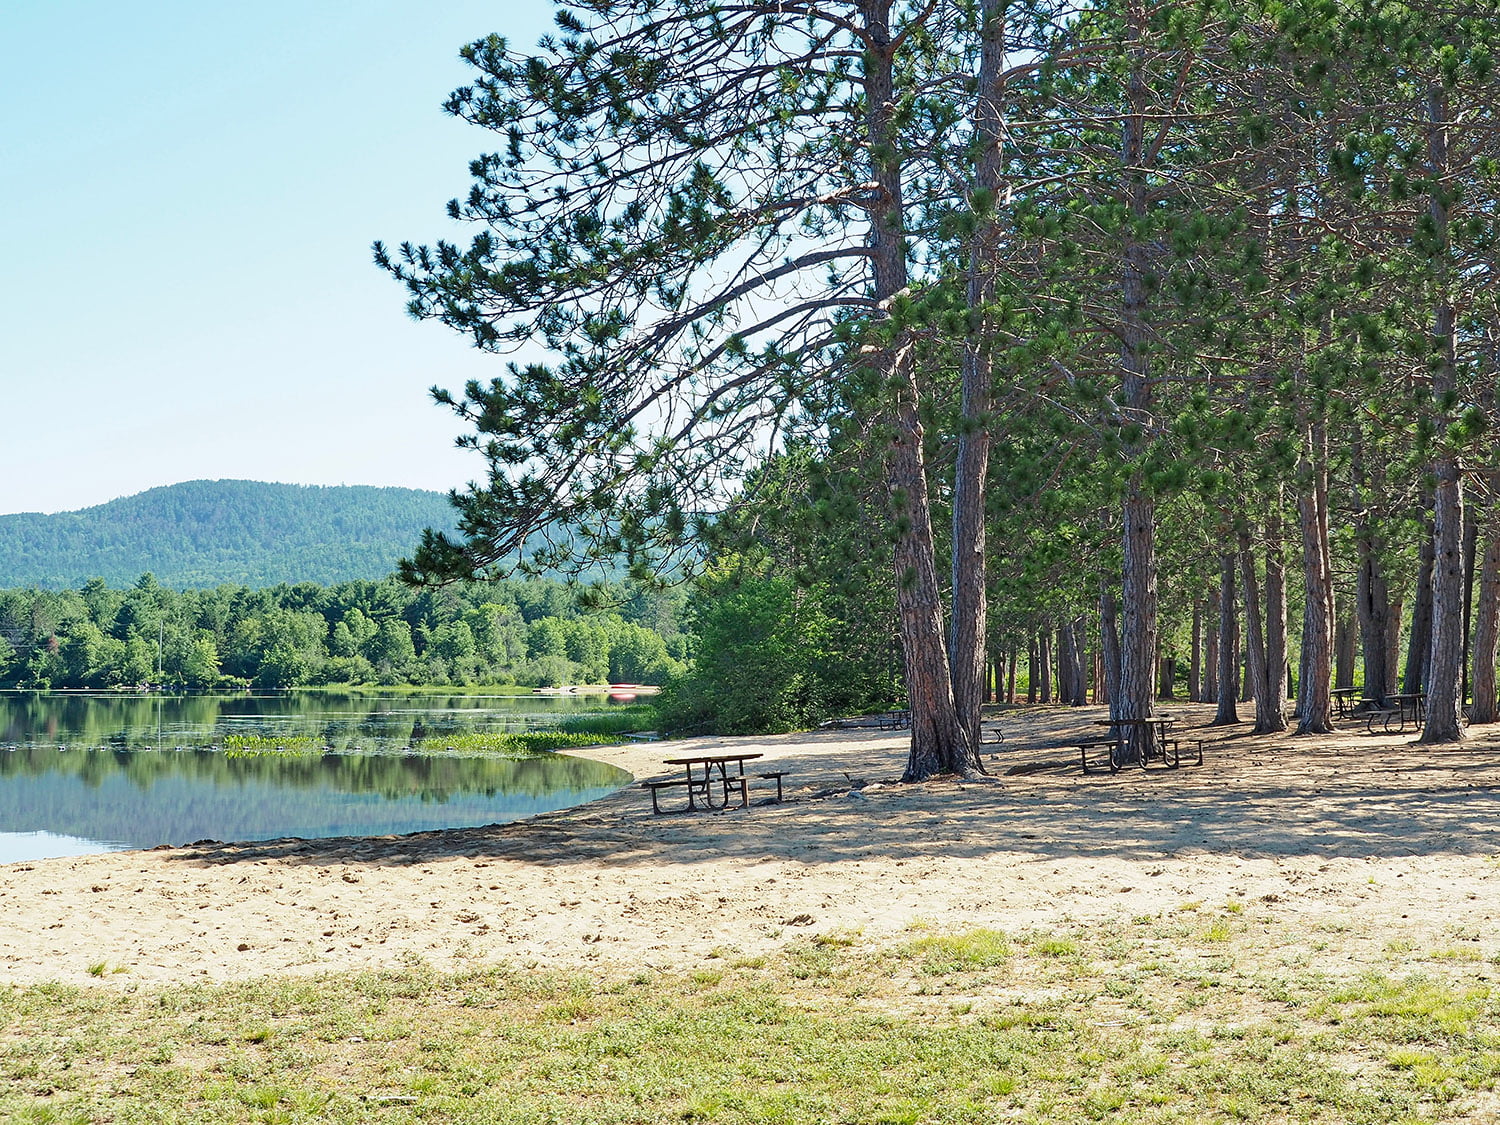 A landscape shot of Samuel de Champlain Provincial Park in the Ottawa Valley. Trees providing shade over a picnic table beside a lake.